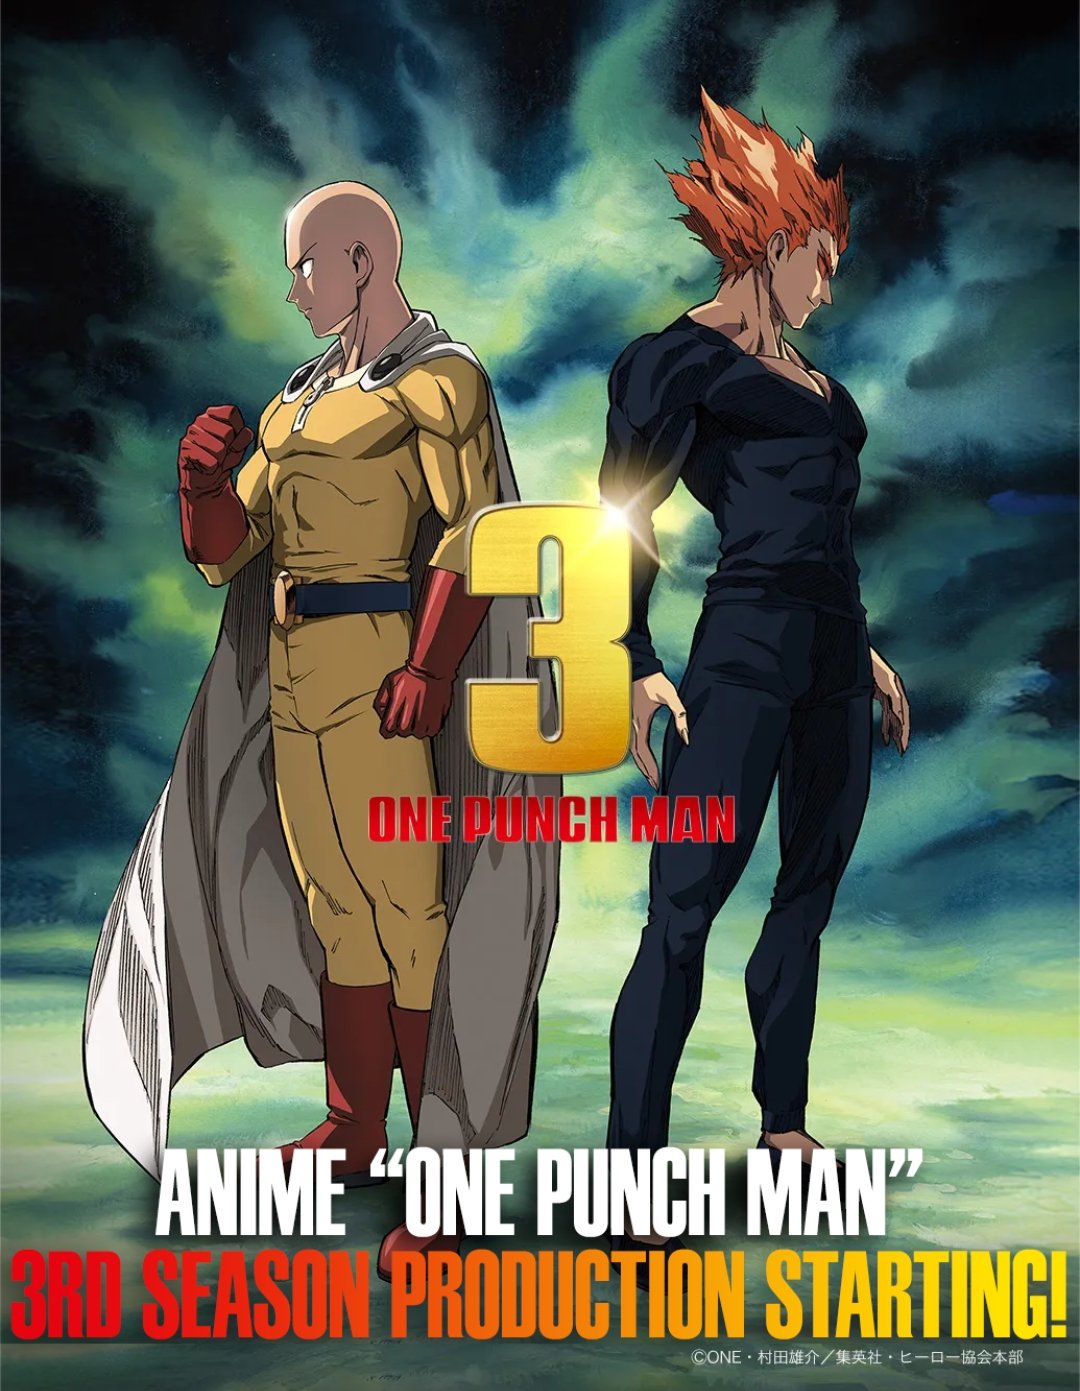 One Punch Man: World Brings Anime Battles To PC and Mobile in January